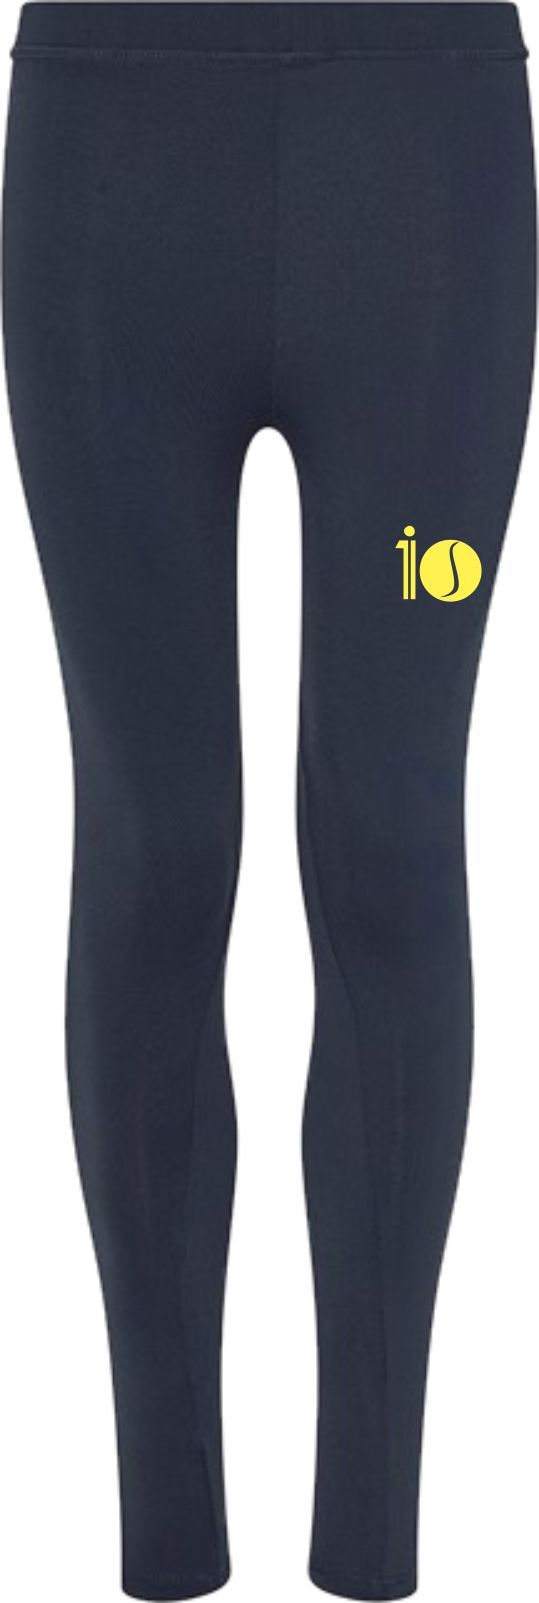 10is Academy Cool Atheletic Pants (Ladies)